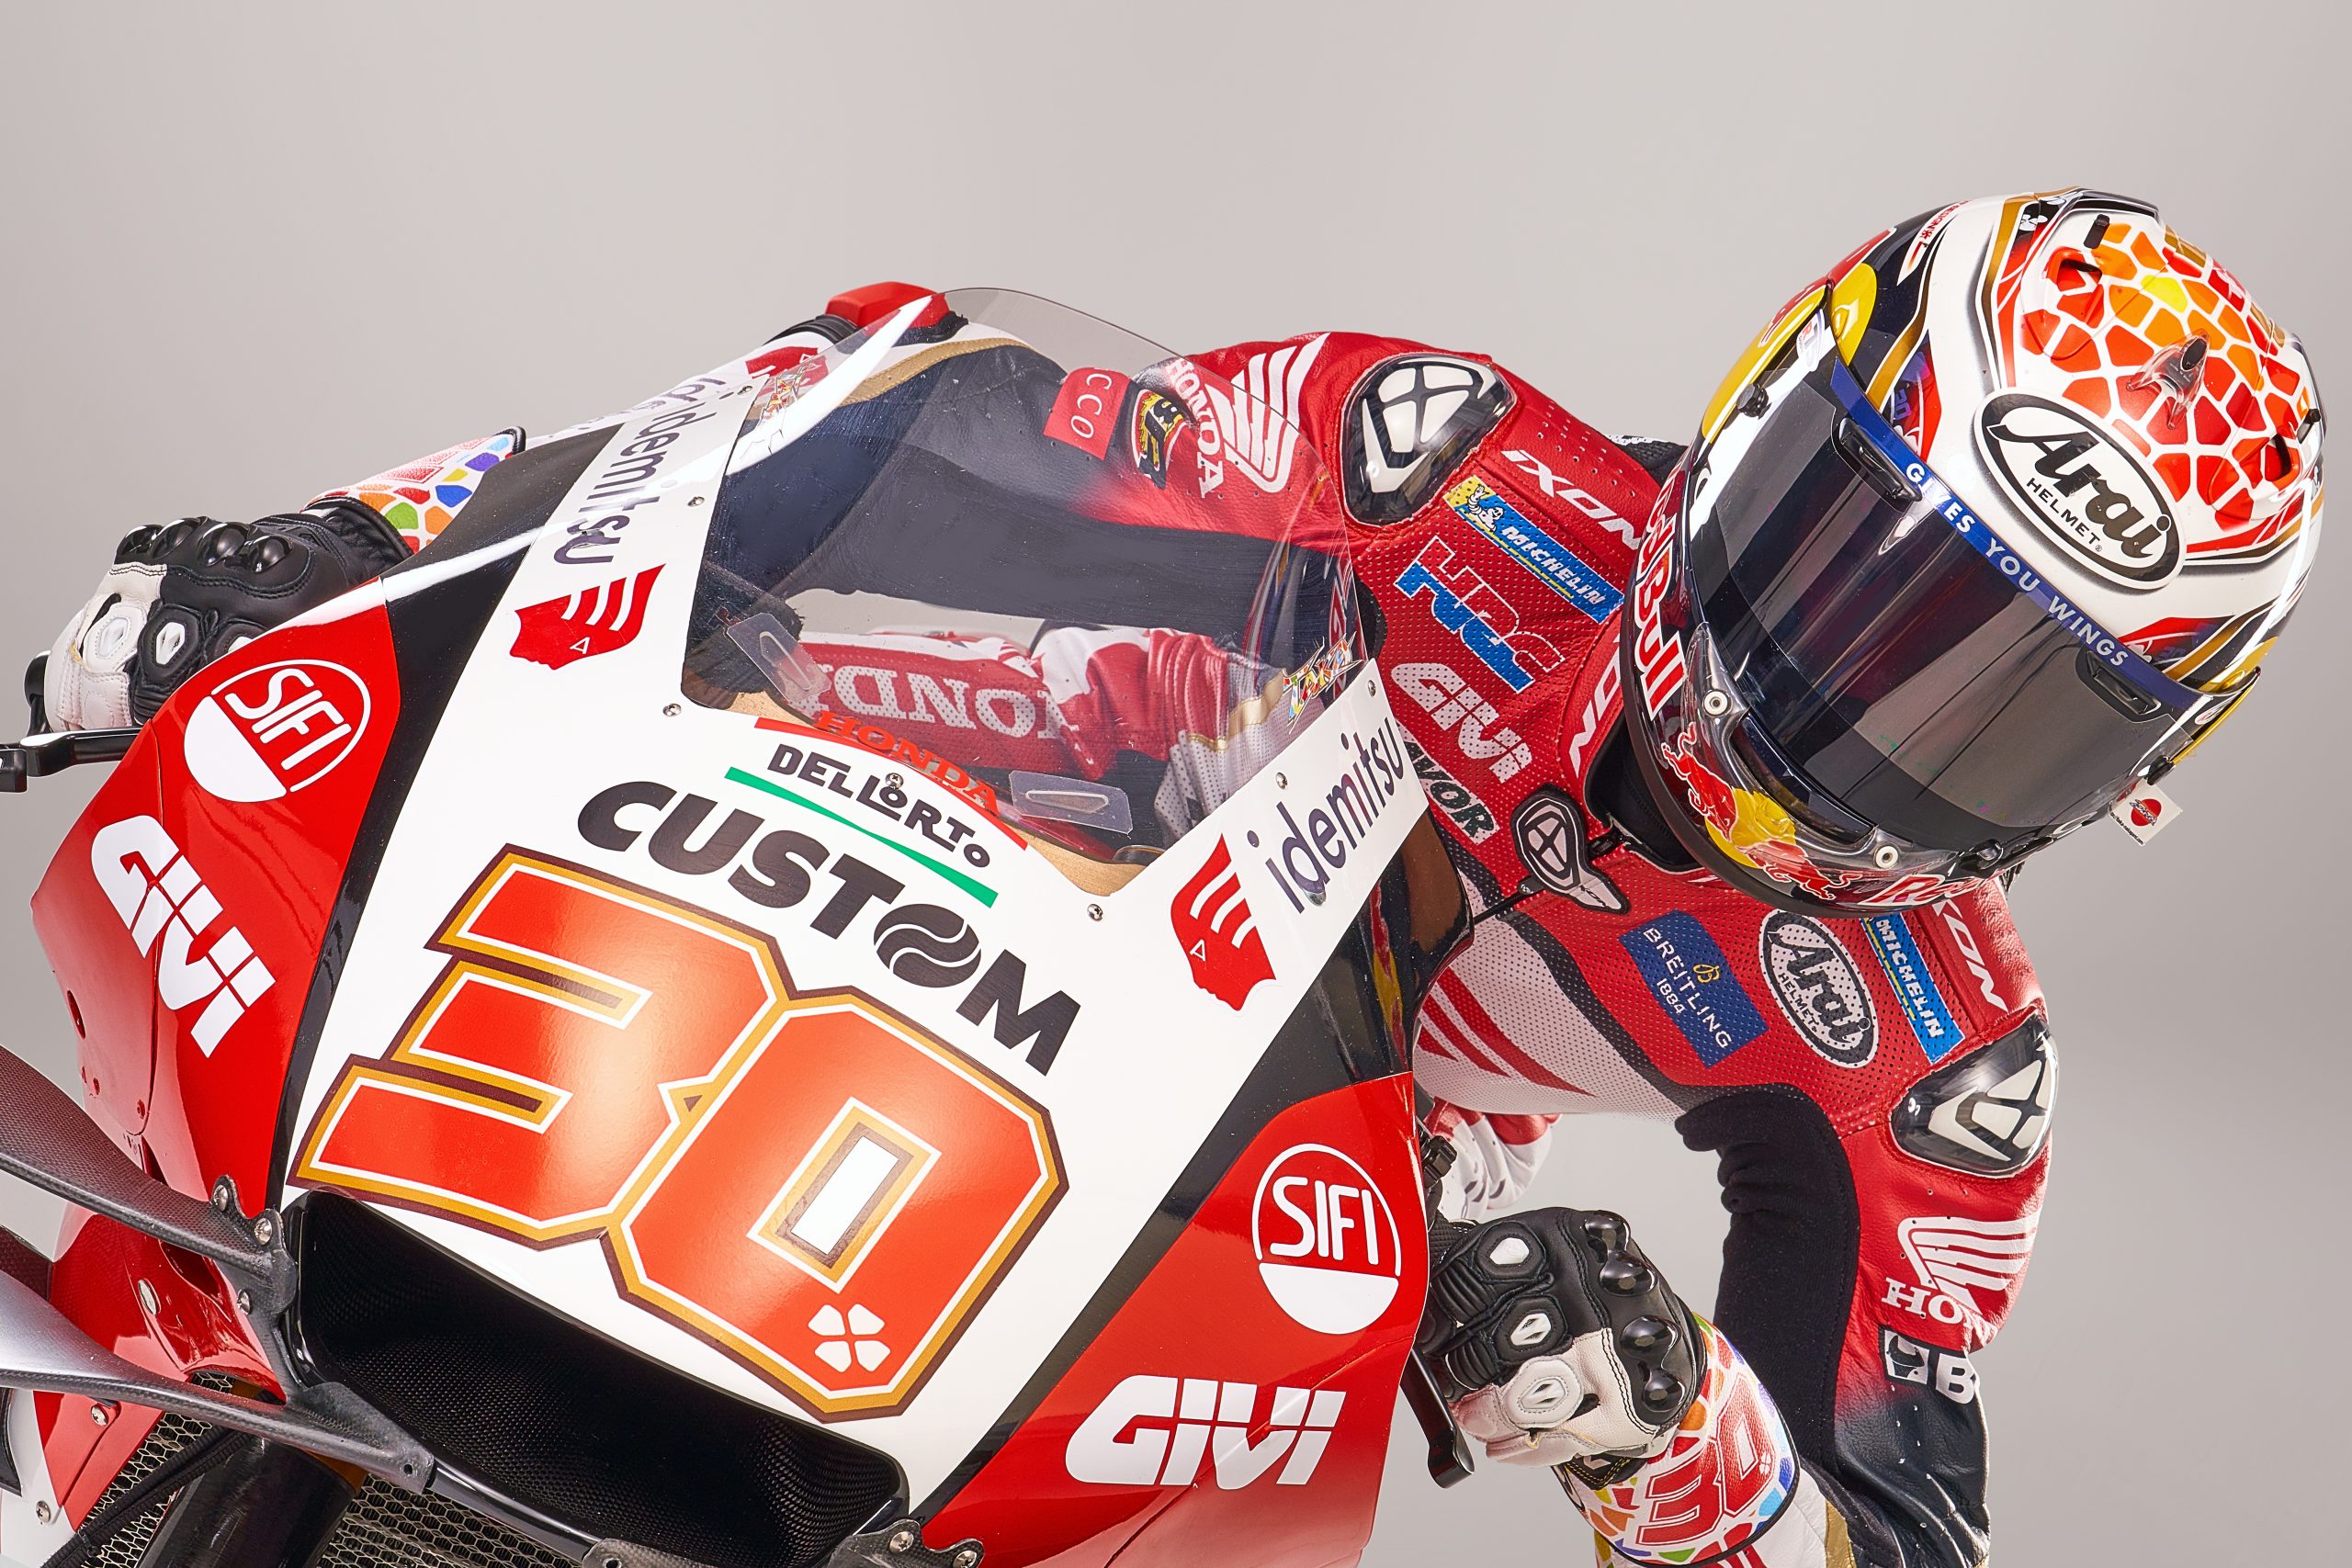 Nakagami explained his number 30